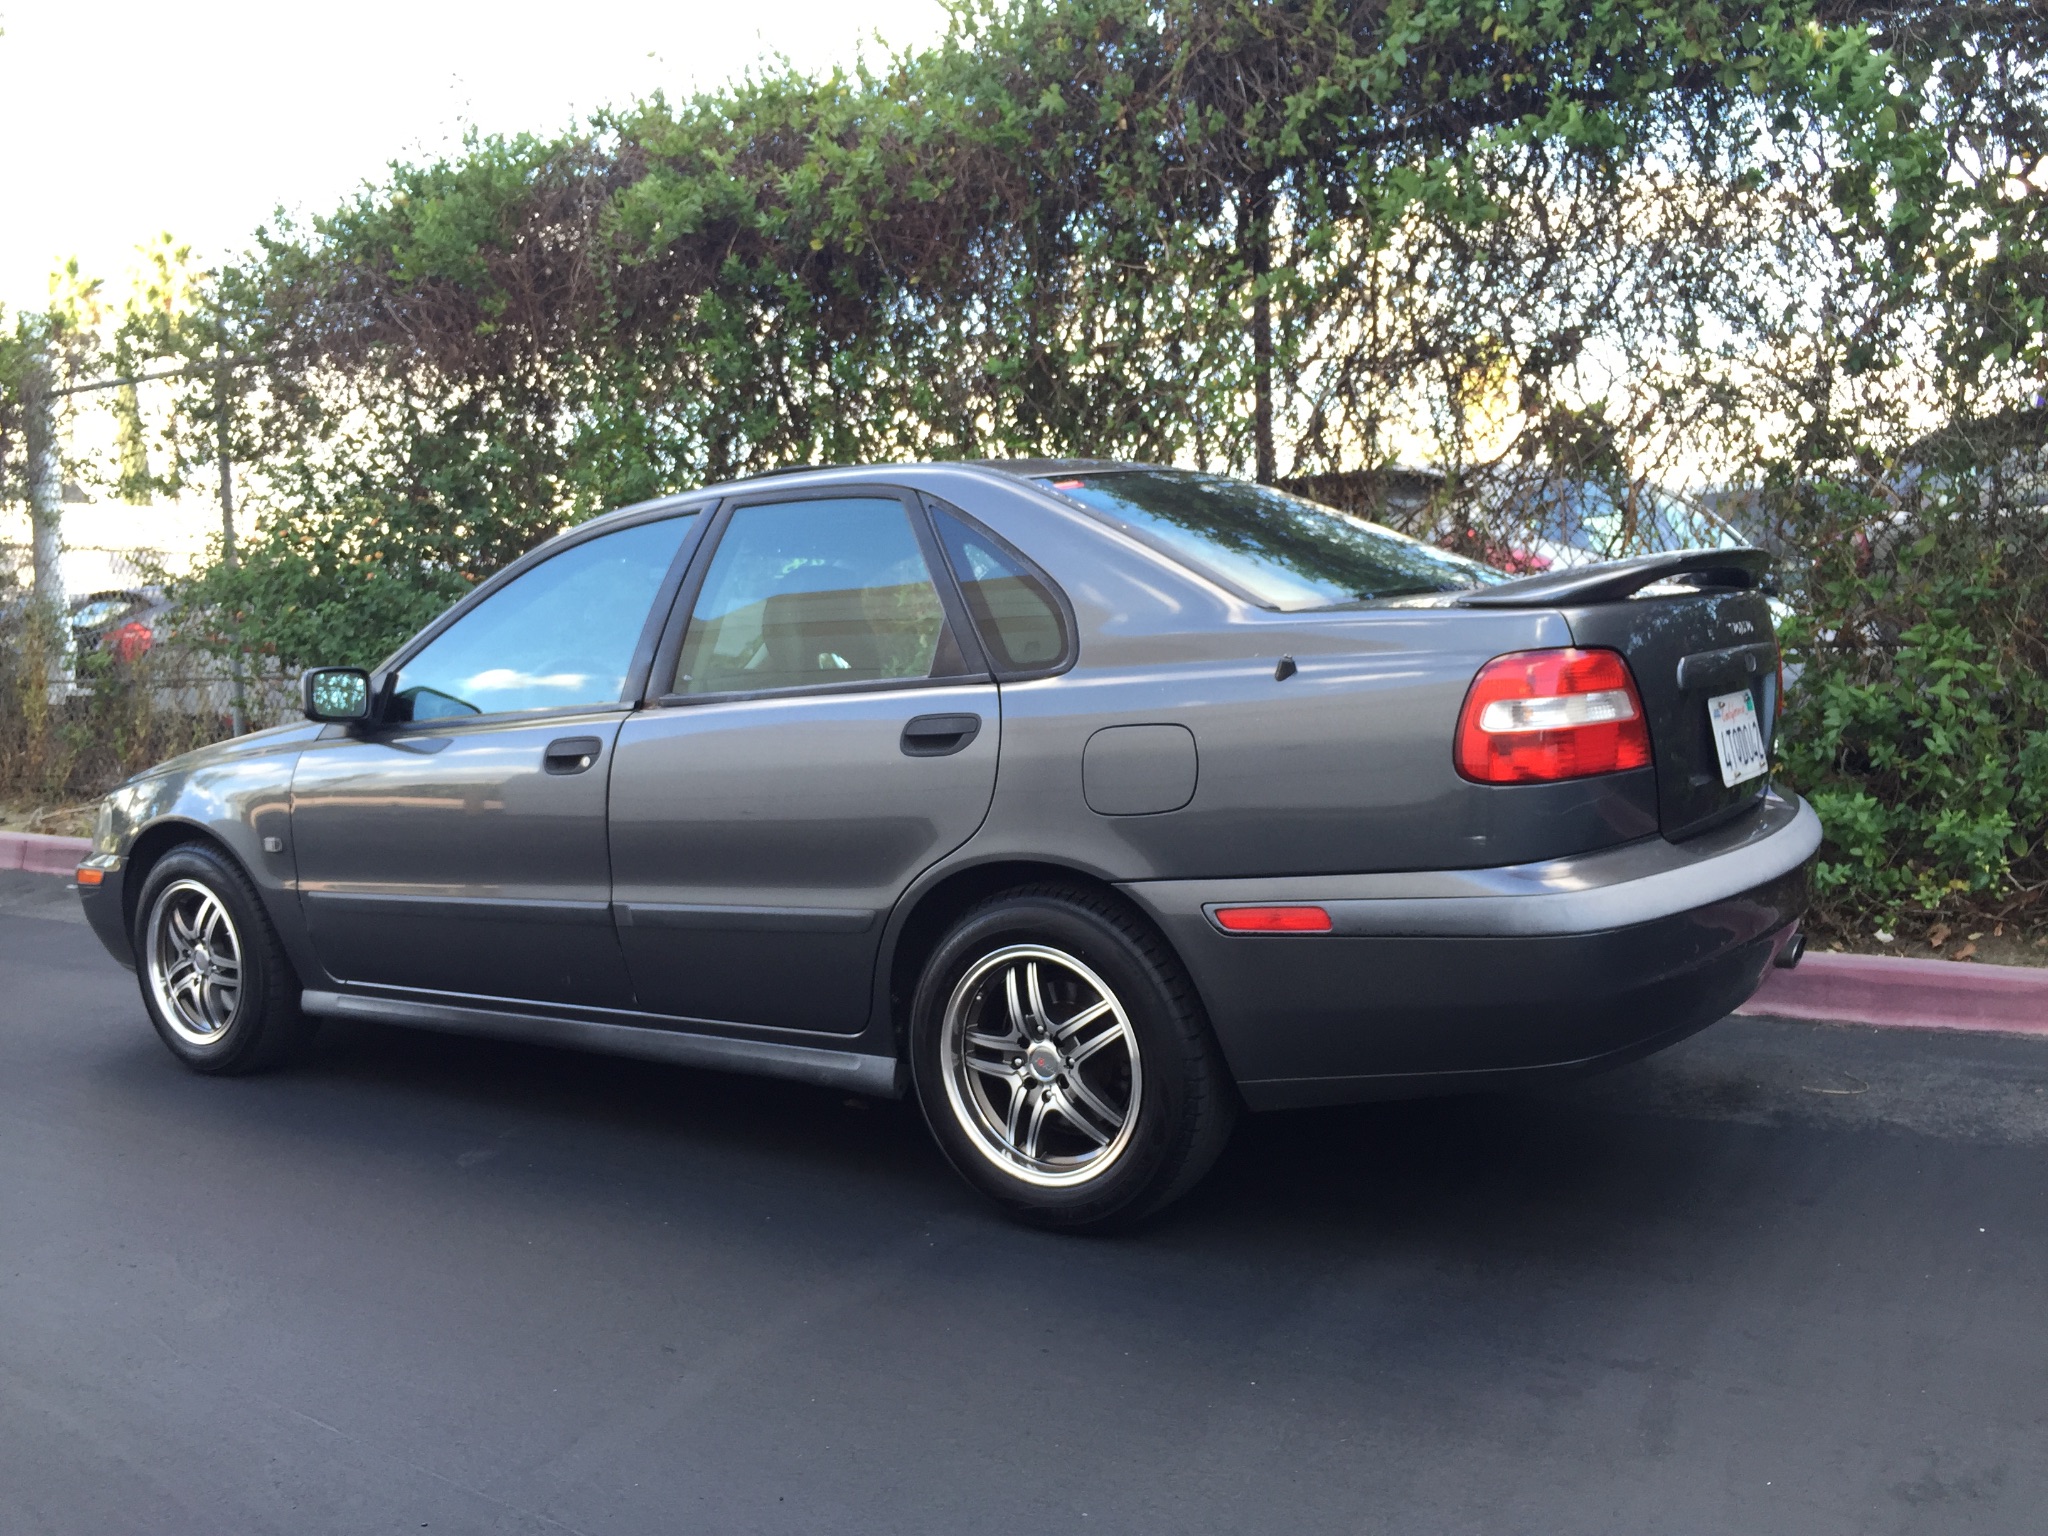 Used 2001 Volvo S40 S430 at City Cars Warehouse INC